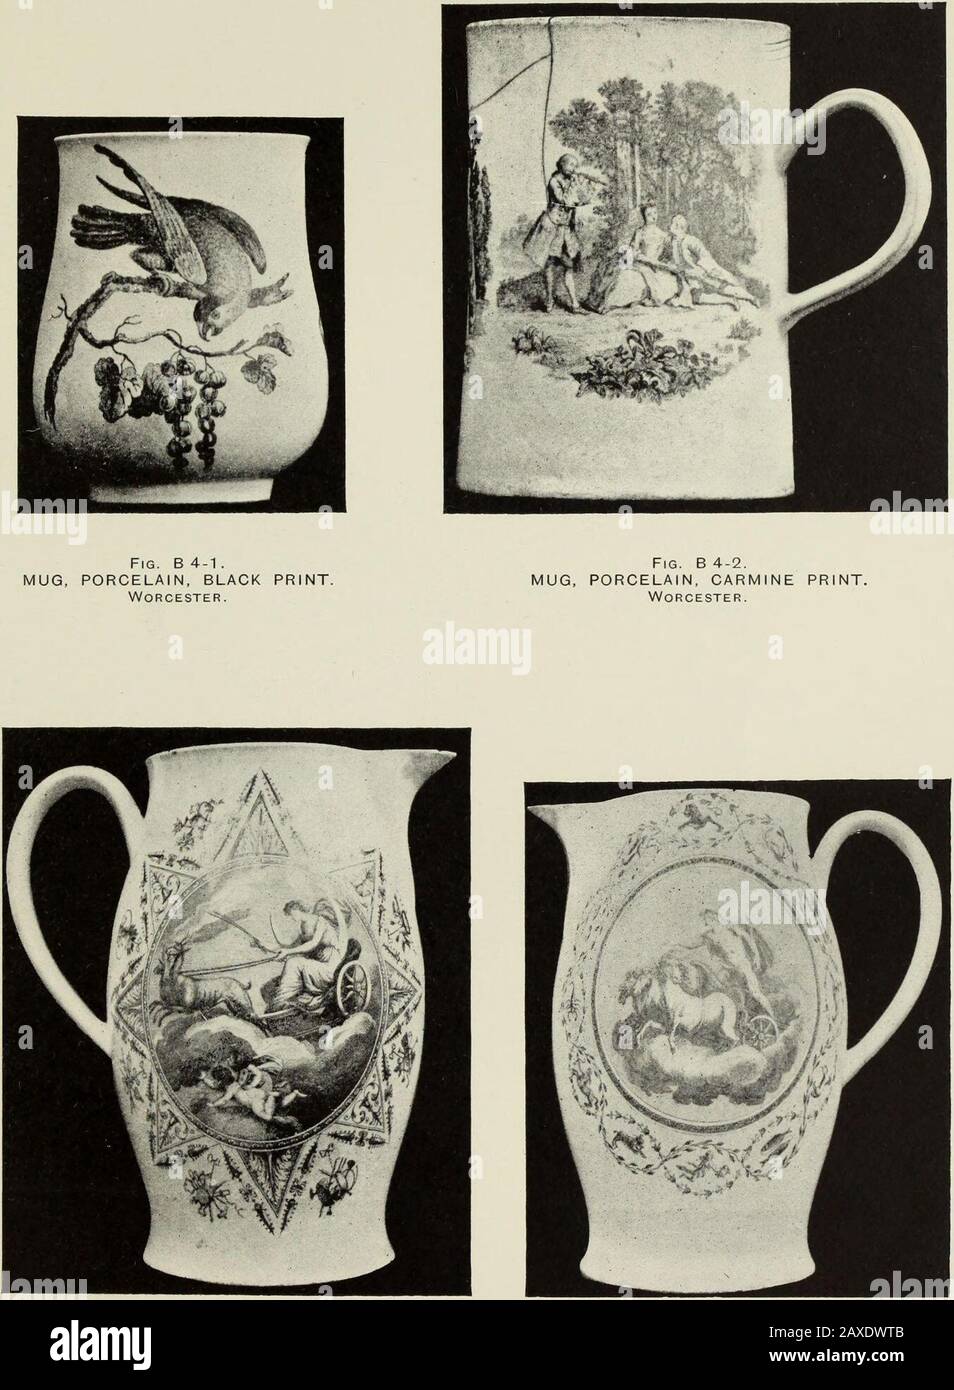 Transfer printing on enamels, porcelain and pottery : its origin and development in the United Kingdom . an enameller, it was a most important thing toknow that a rival to his art was coming into the field.Having seen those Bow prints so beautifully anddelicately engraved and transferred, we can easilyunderstand why a man of rare ability and taste, likeWilliam Duesbury, would be dissatisfied with therougher work achieved by Richard Holdship and hisengravers. Moreover, there was also the Worcestertransfer work of Hancock which must have beenknown to Mr. Duesbury, and which was so muchsuperior, Stock Photo